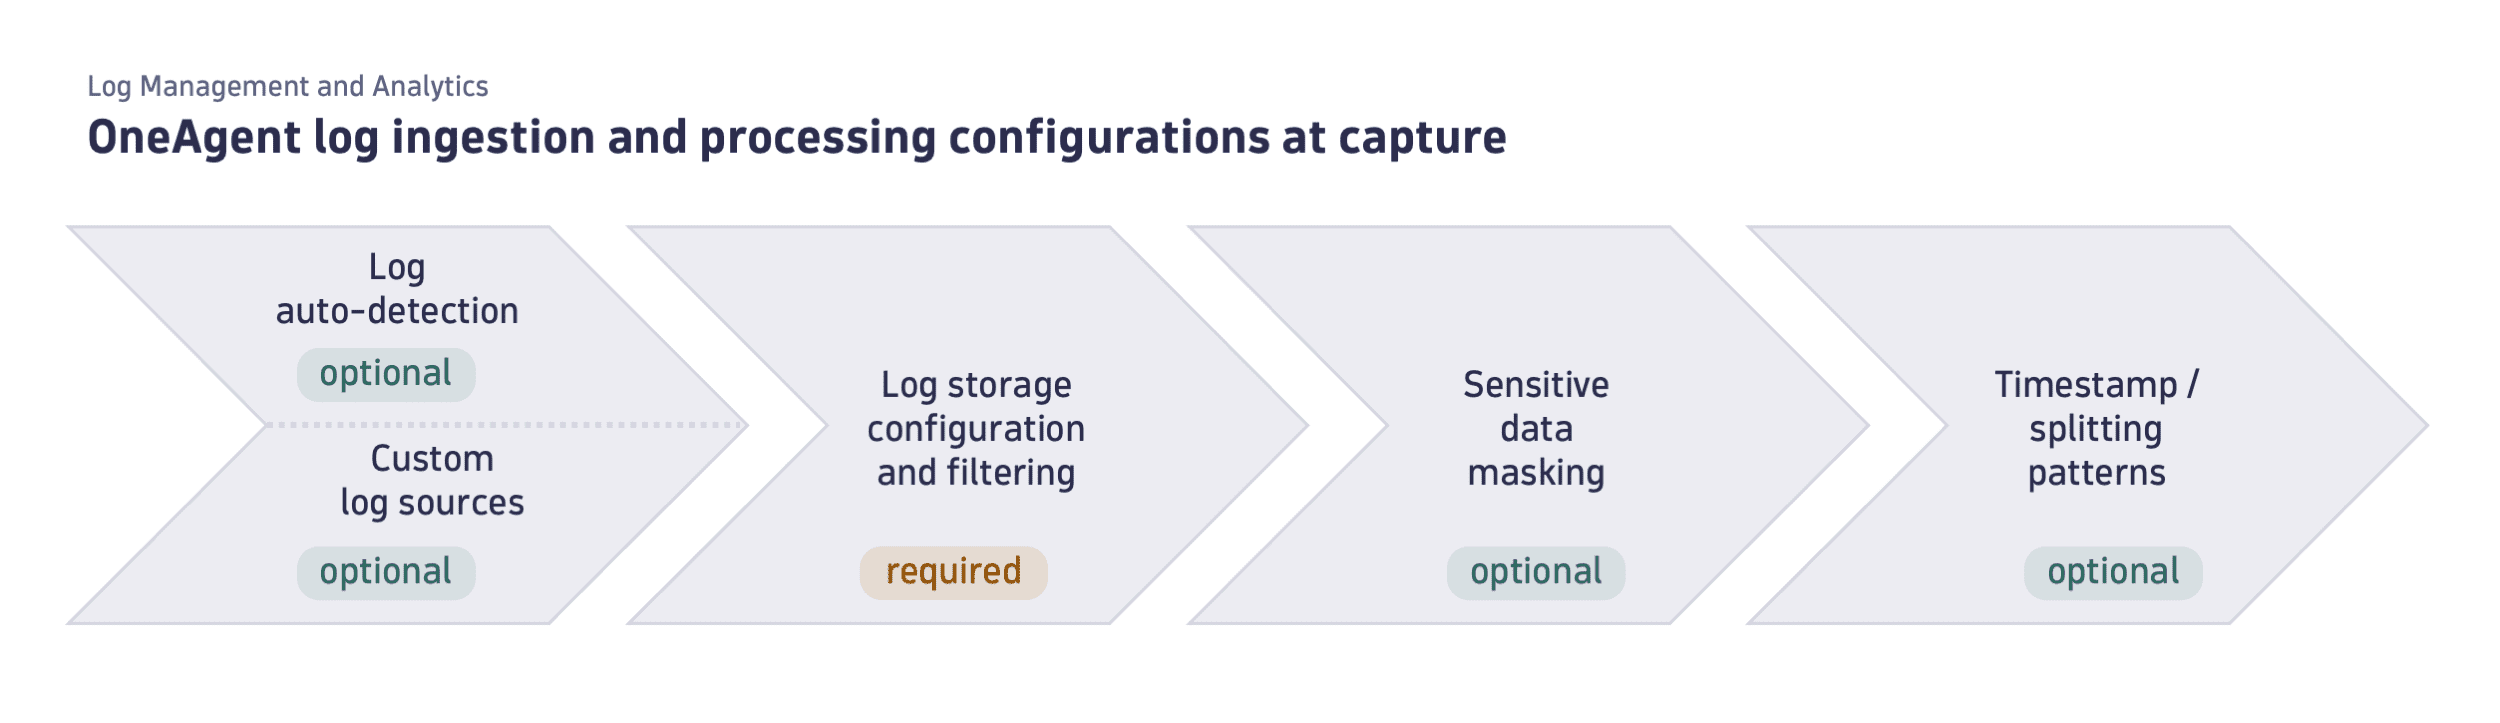 LMA - OneAgent log ingestion and processing configurations at capture